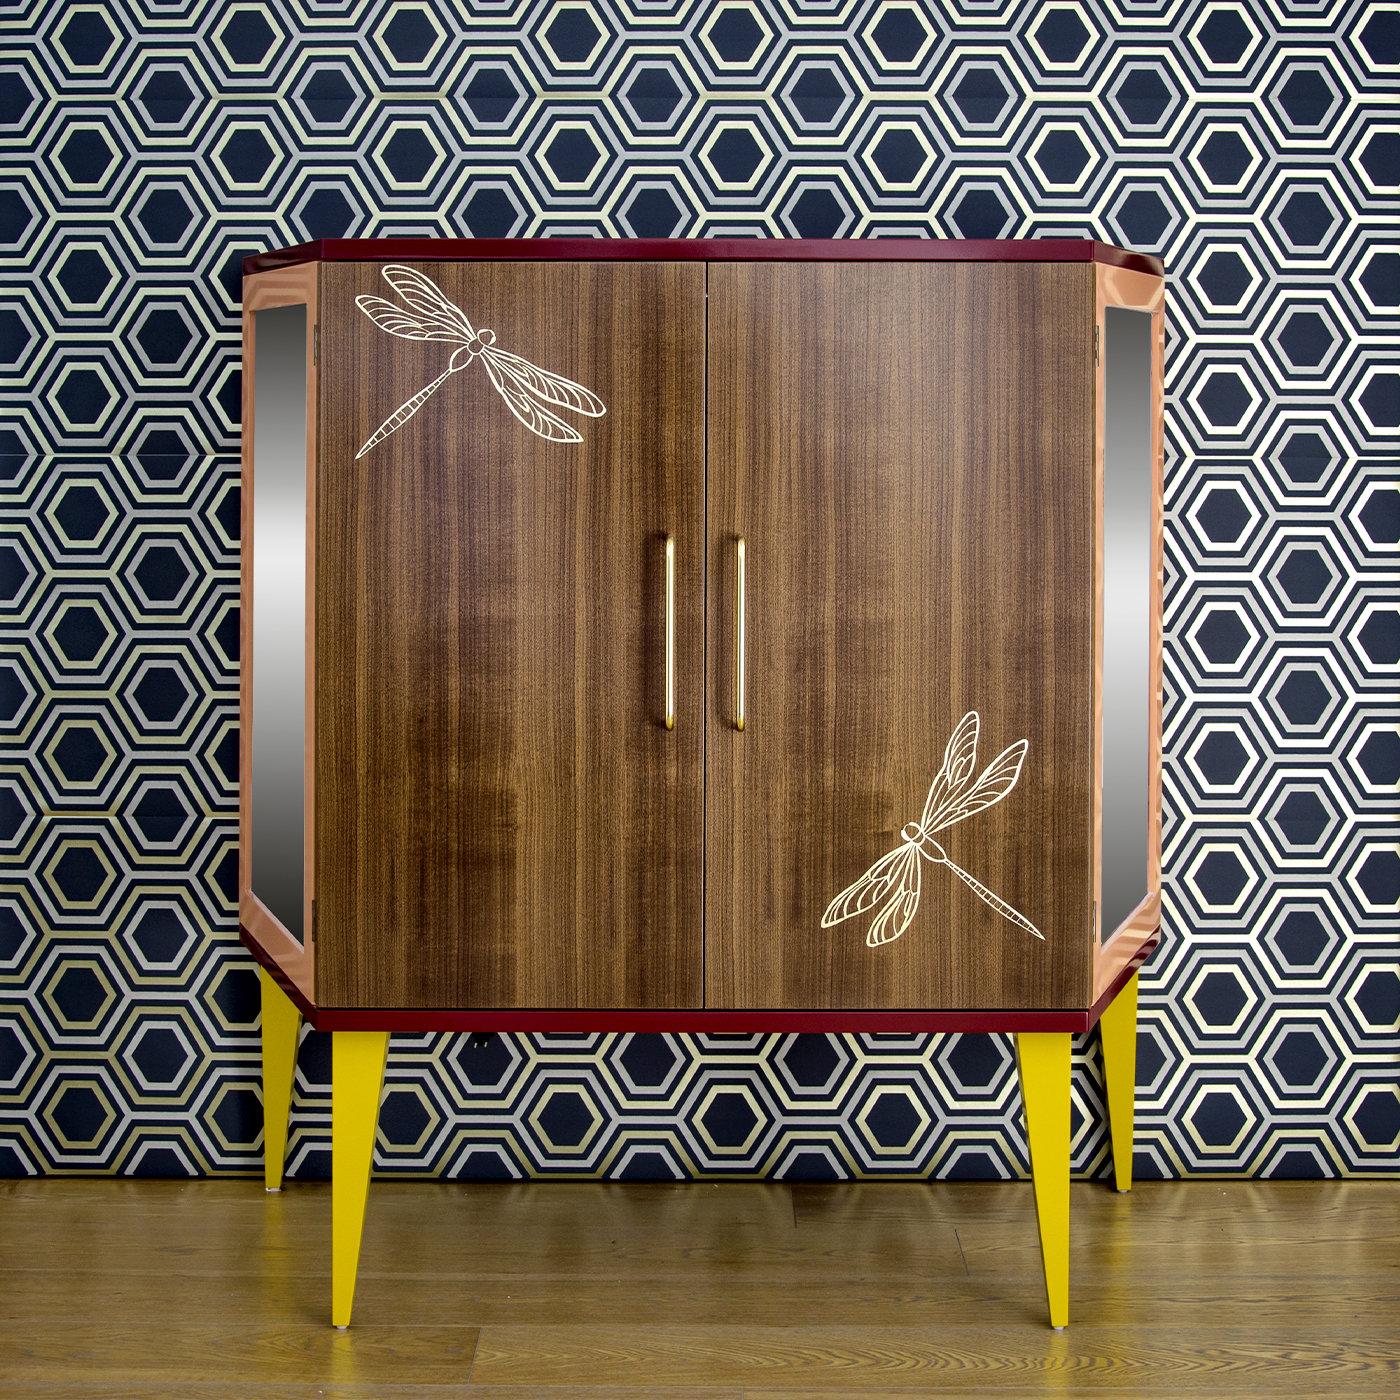 This walnut wood shoe cabinet features two doors decorated with two large, white dragonflies and brass handles. The sides are made of glass and Vienna straw to guarantee breathability and show that practicality can also mean beauty. Inside are